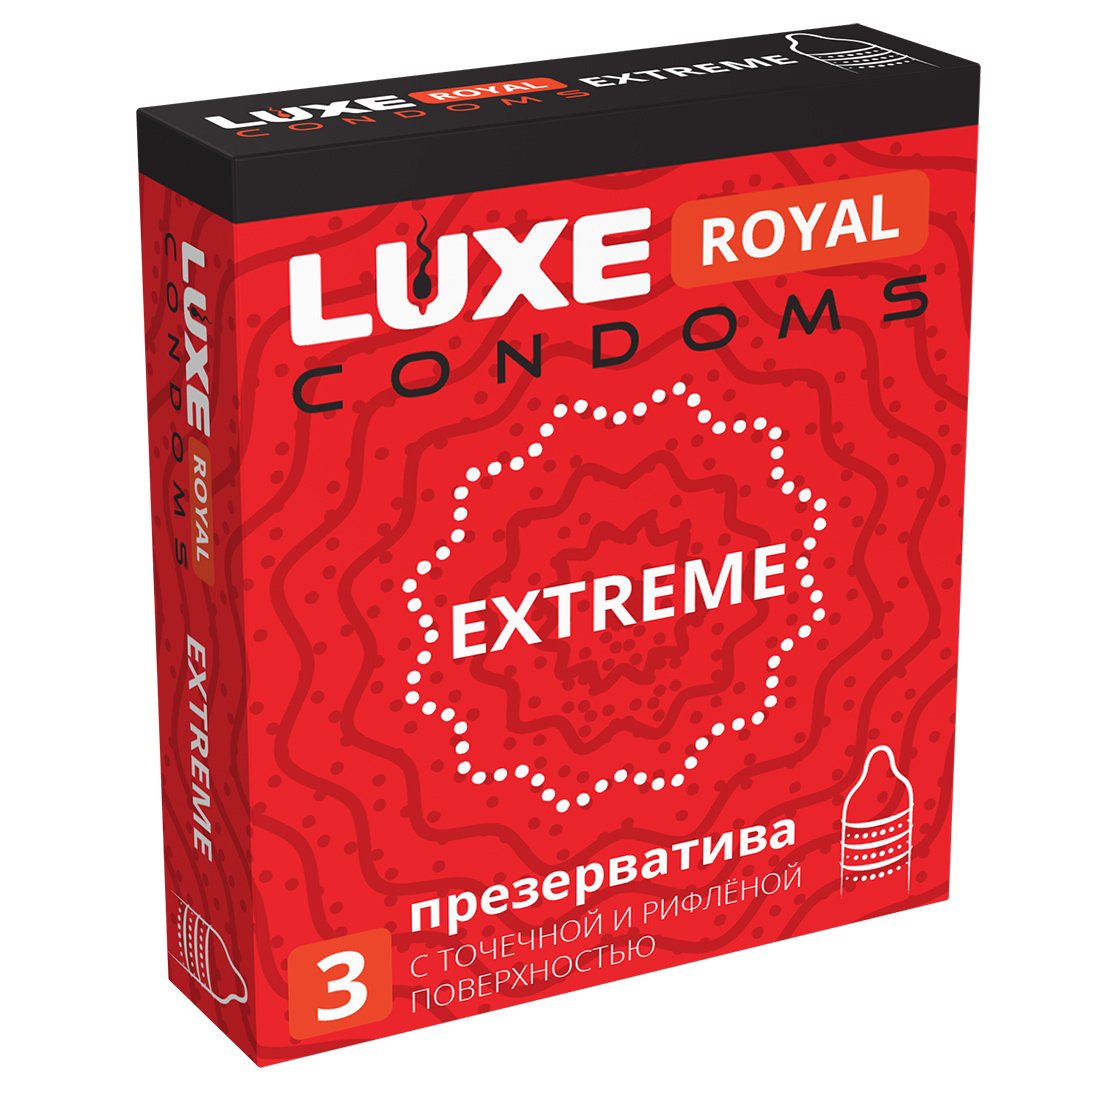  LUXE ROYAL EXTREME      3 